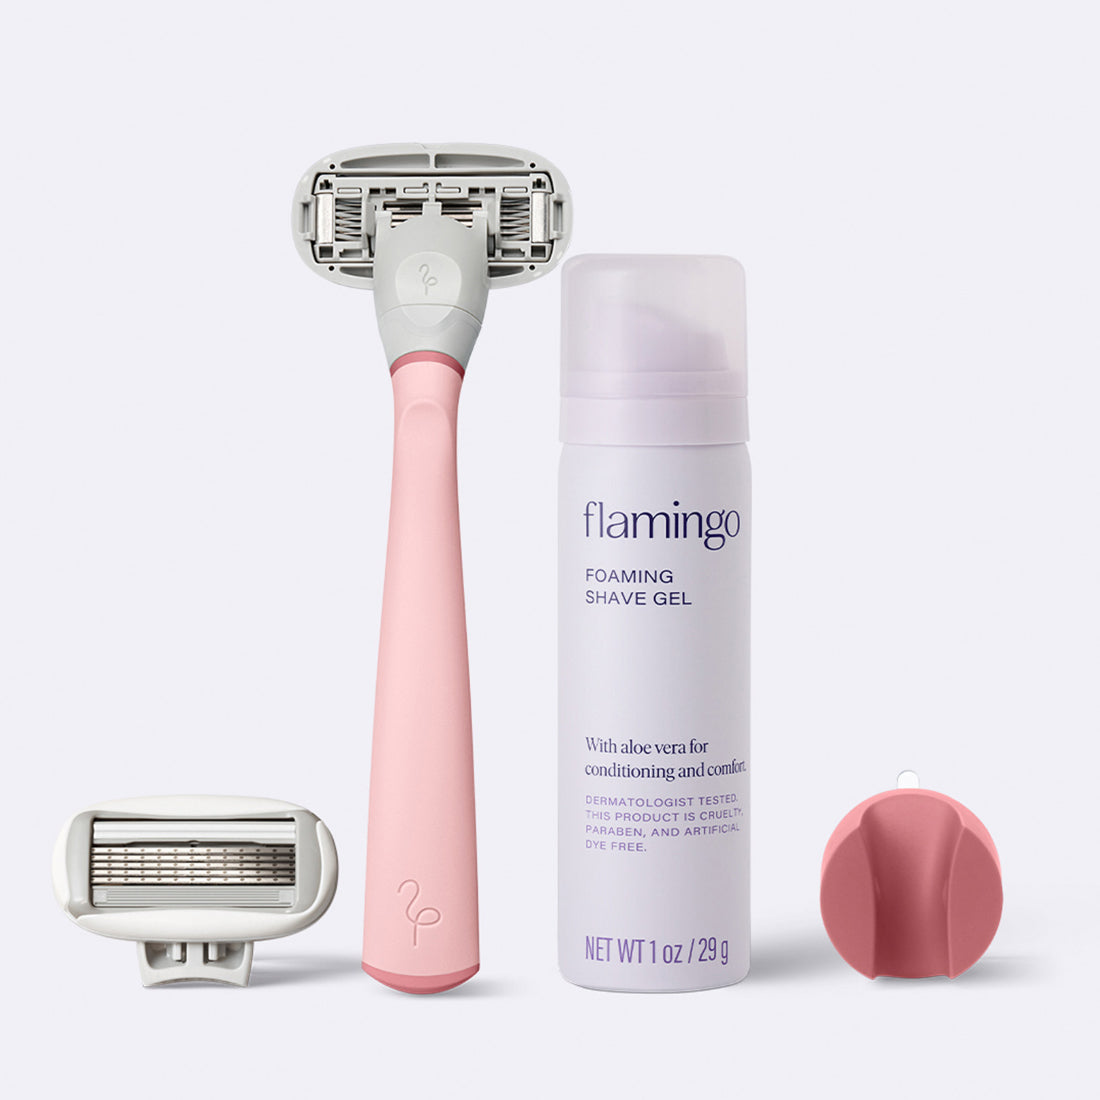 Flamingo Starter Set in the color Rose, featuring a razor, shower holder, extra blade, and mini 1oz foaming shave gel